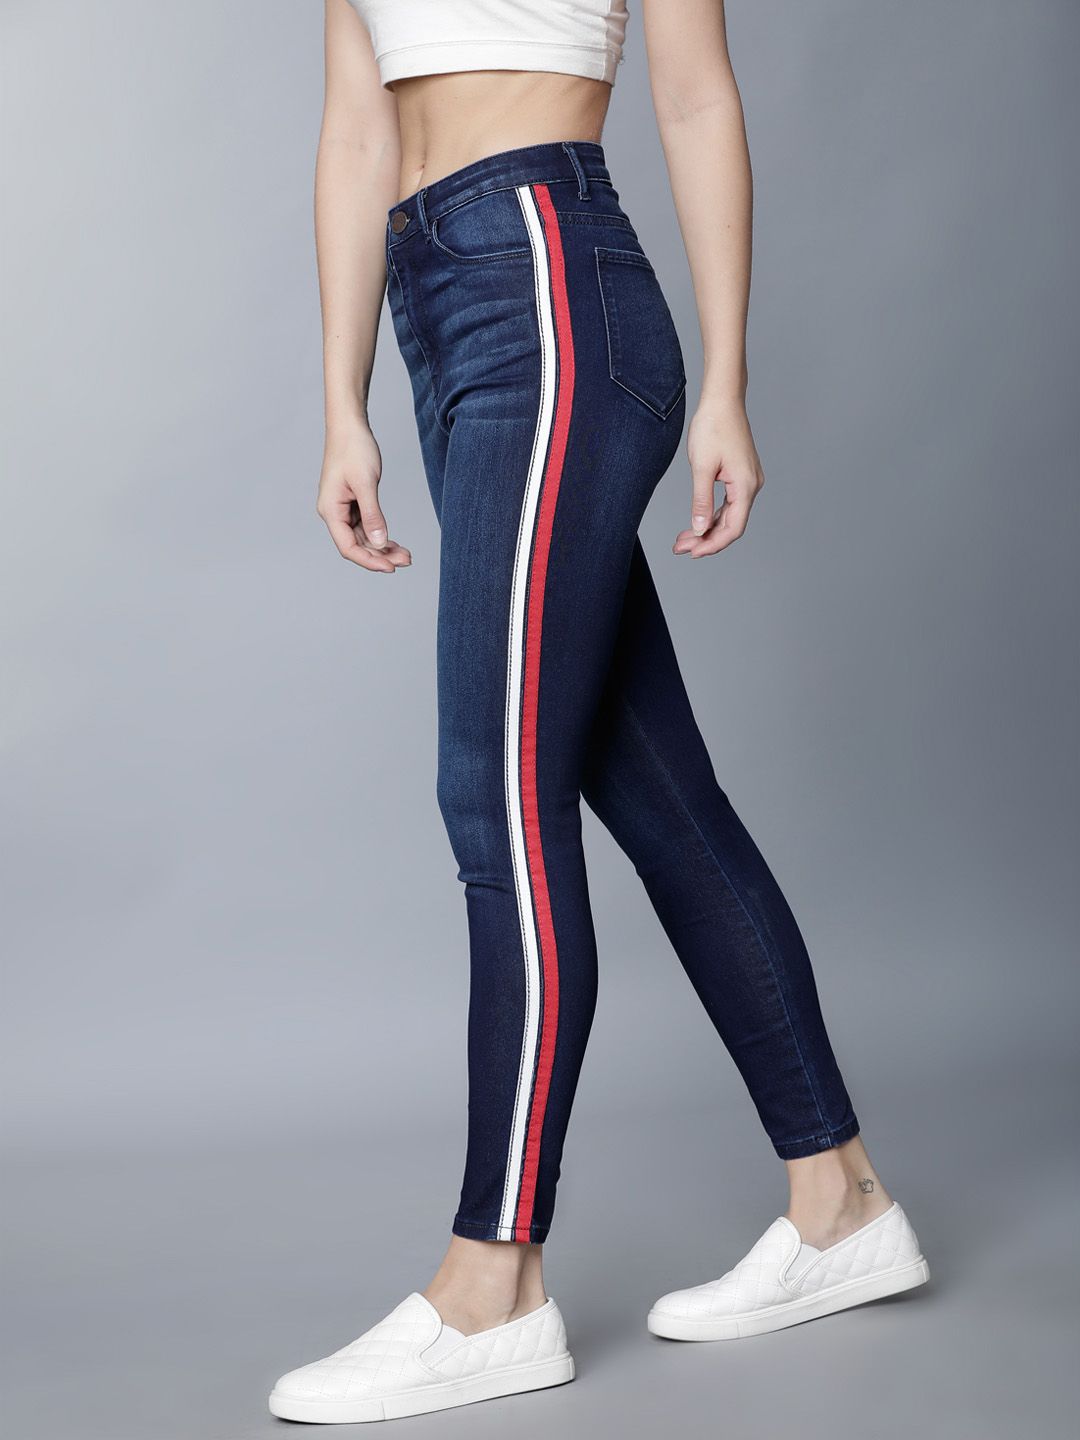 Tokyo Talkies Women Blue Super Skinny Fit Mid-Rise Clean Look Stretchable Jeans Price in India